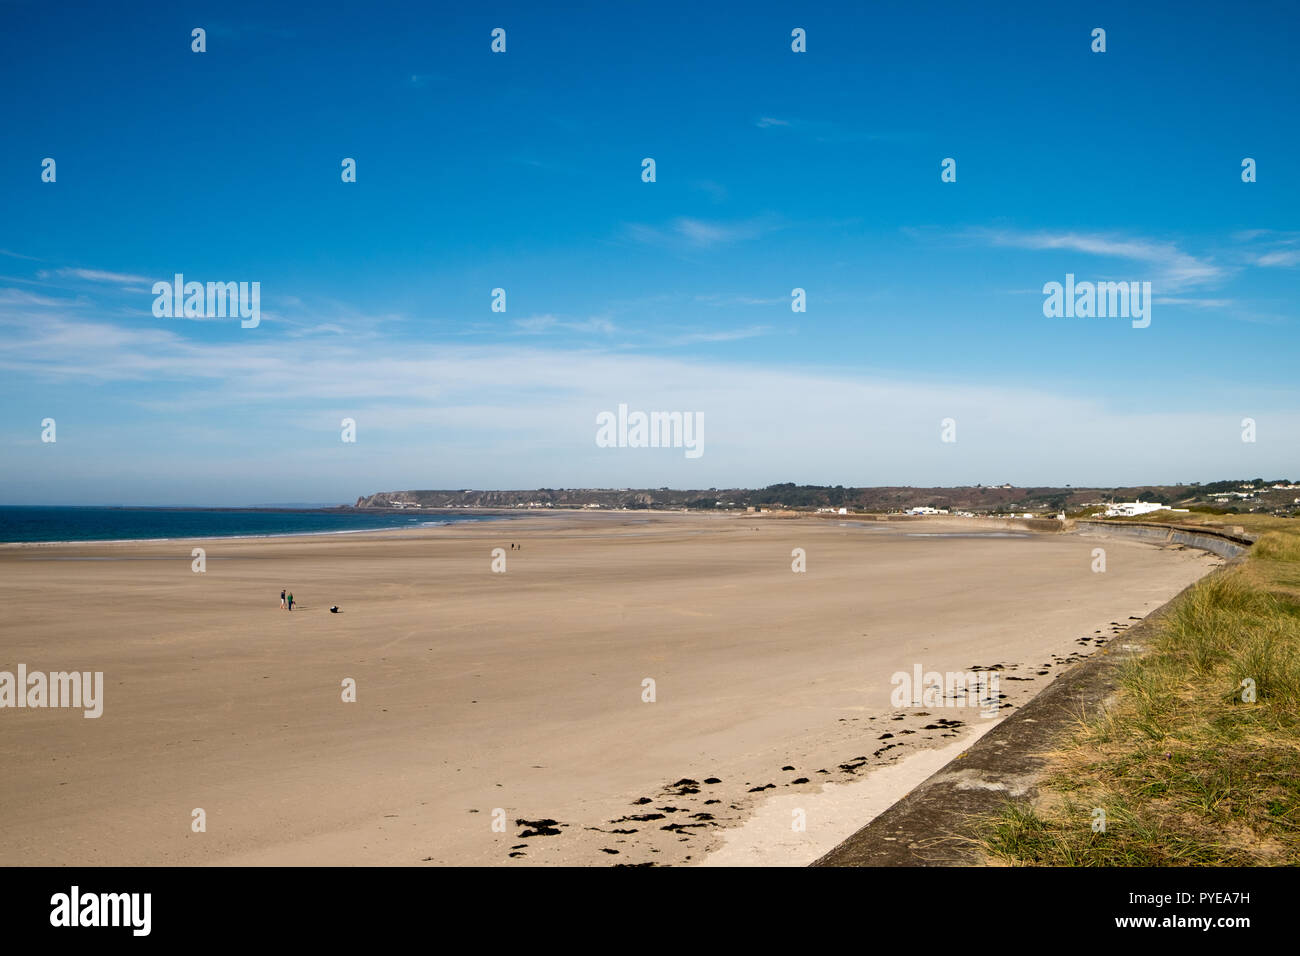 St Ouen's Beach in Jersey, The Channel Islands Stock Photo